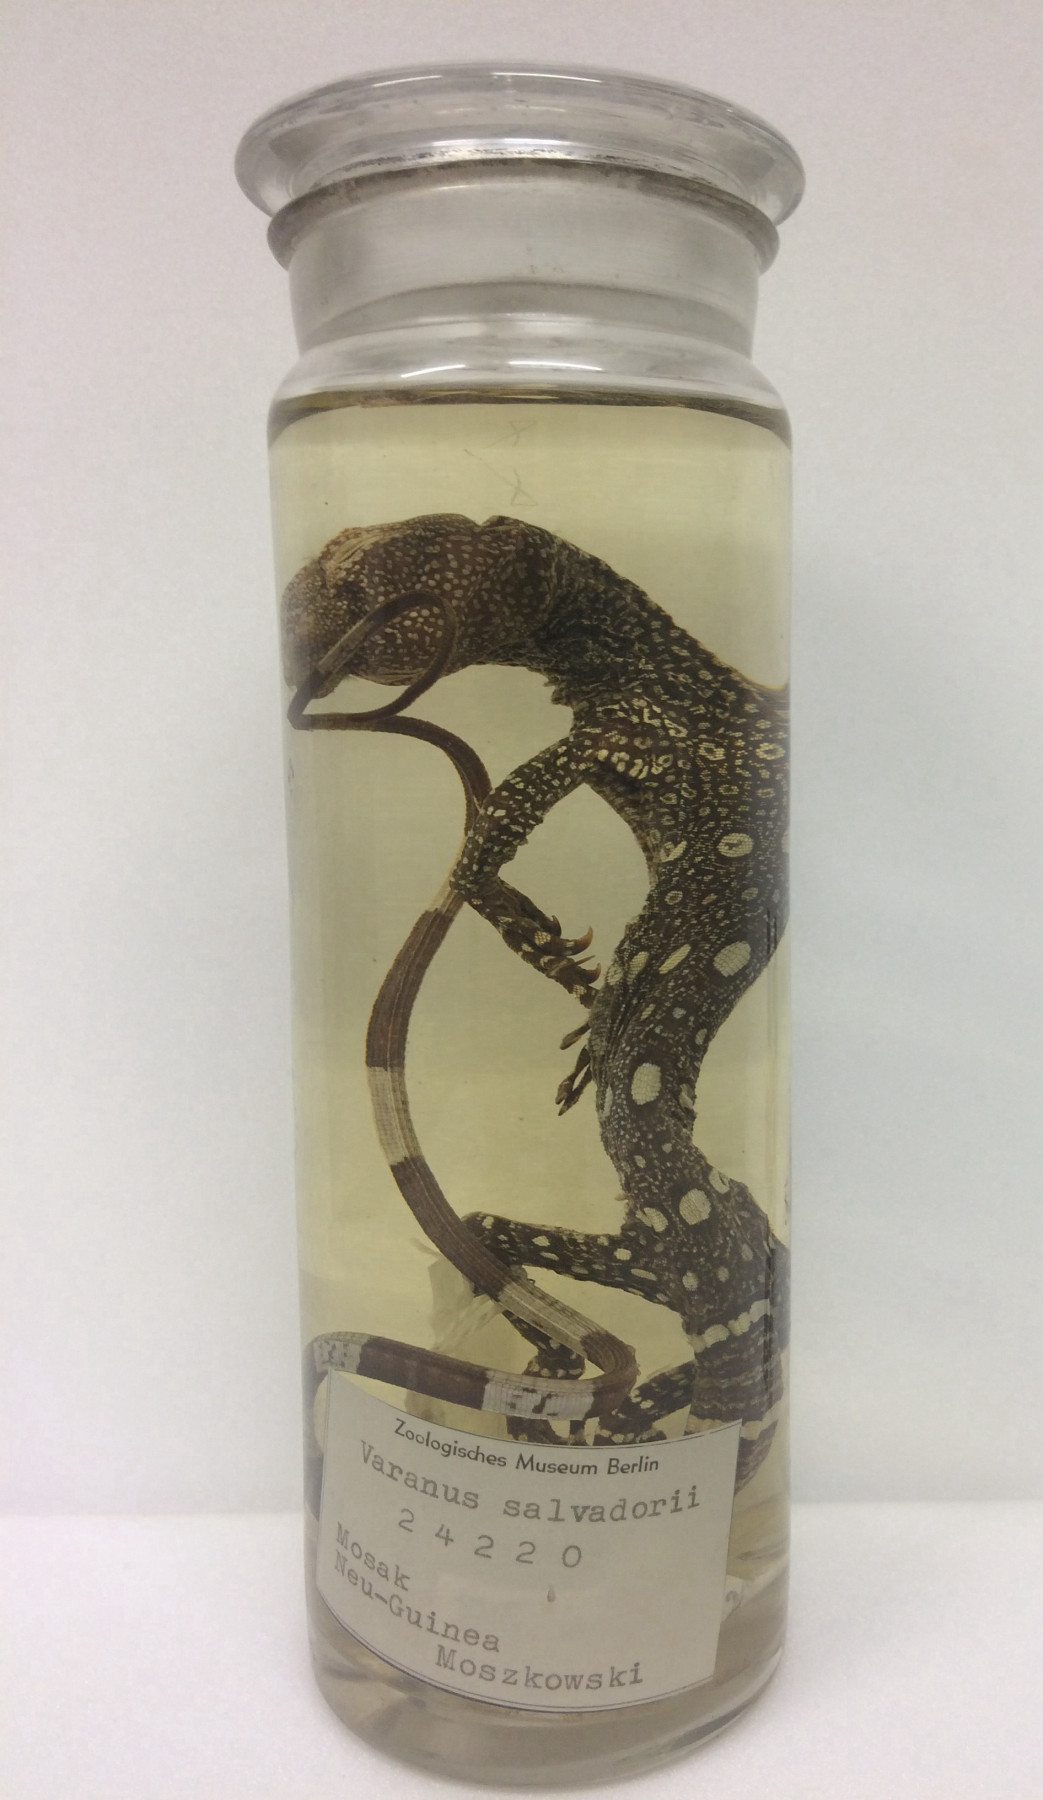 Photo of a monitor lizard and its label preserved in alcohol.